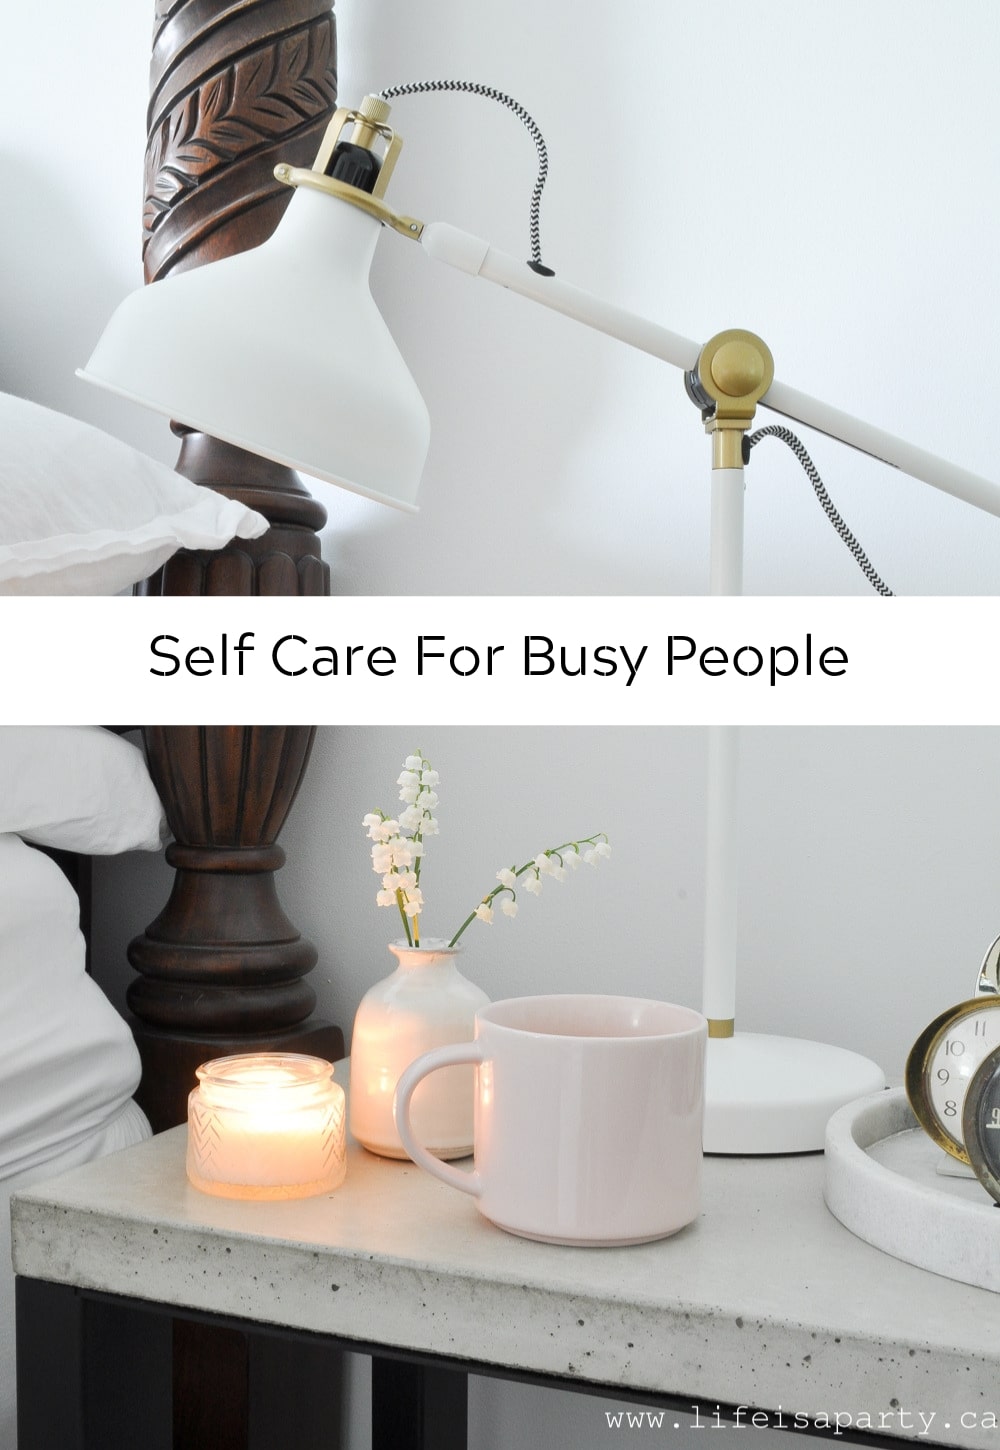 Self Care For Busy People: simple tips for recharging and relaxing that are perfect for someone in a busy season of life.